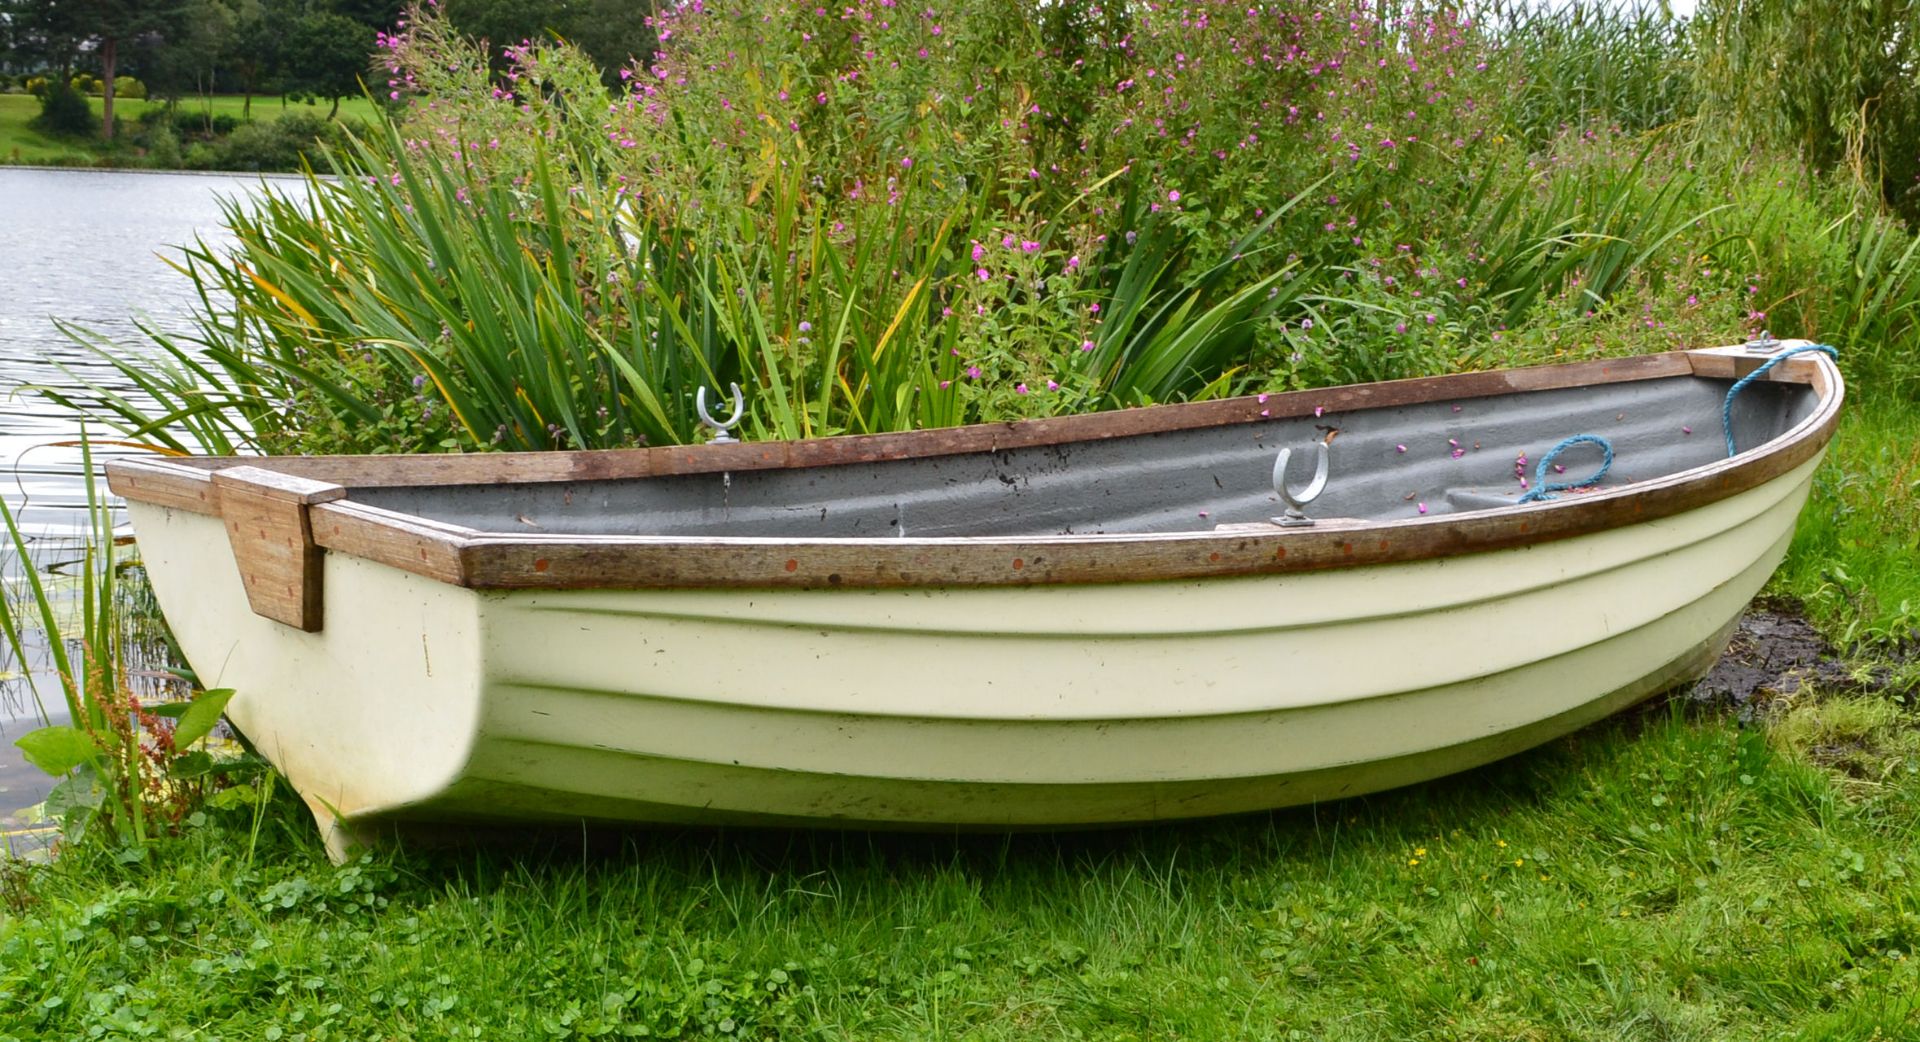 1 x Clovelly 290 Glass Fibre Rowing Boat - 240Kg Maximum Load - CL226 - Location: Knutsford WA16 - Image 5 of 15